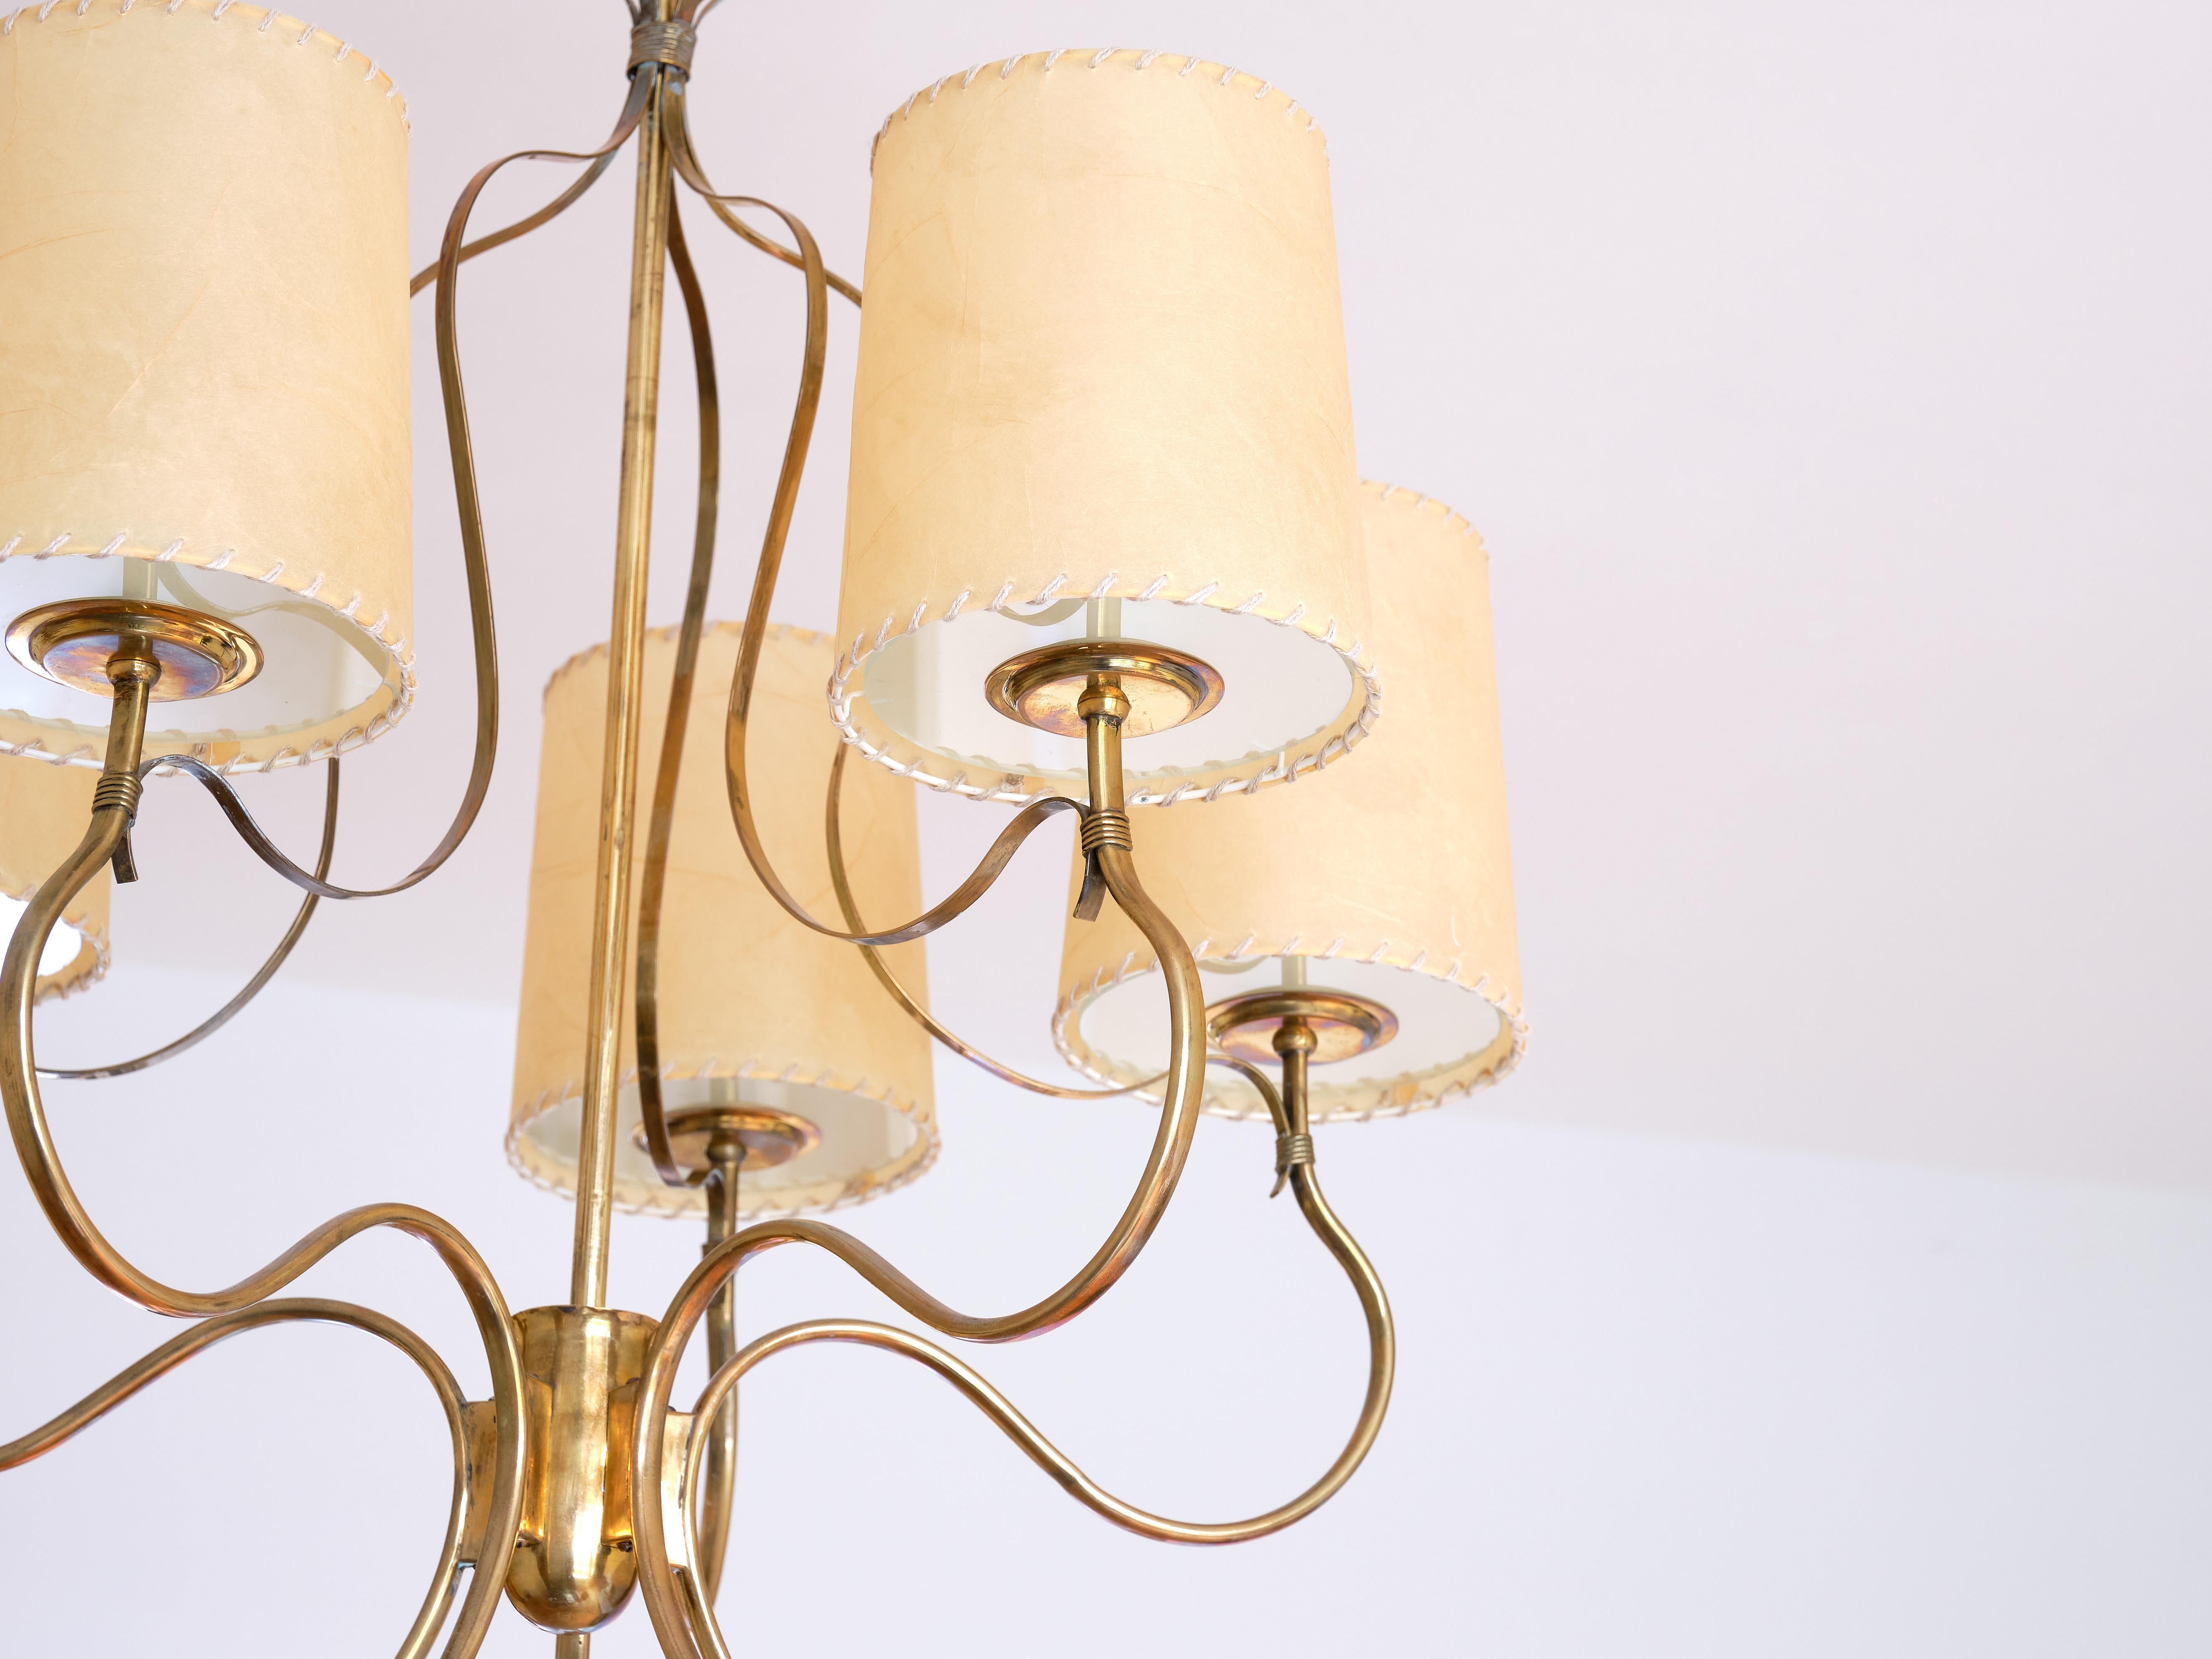 Mid-20th Century Paavo Tynell Chandelier in Brass and Parchment, Model 9001, Taito Finland, 1940s For Sale